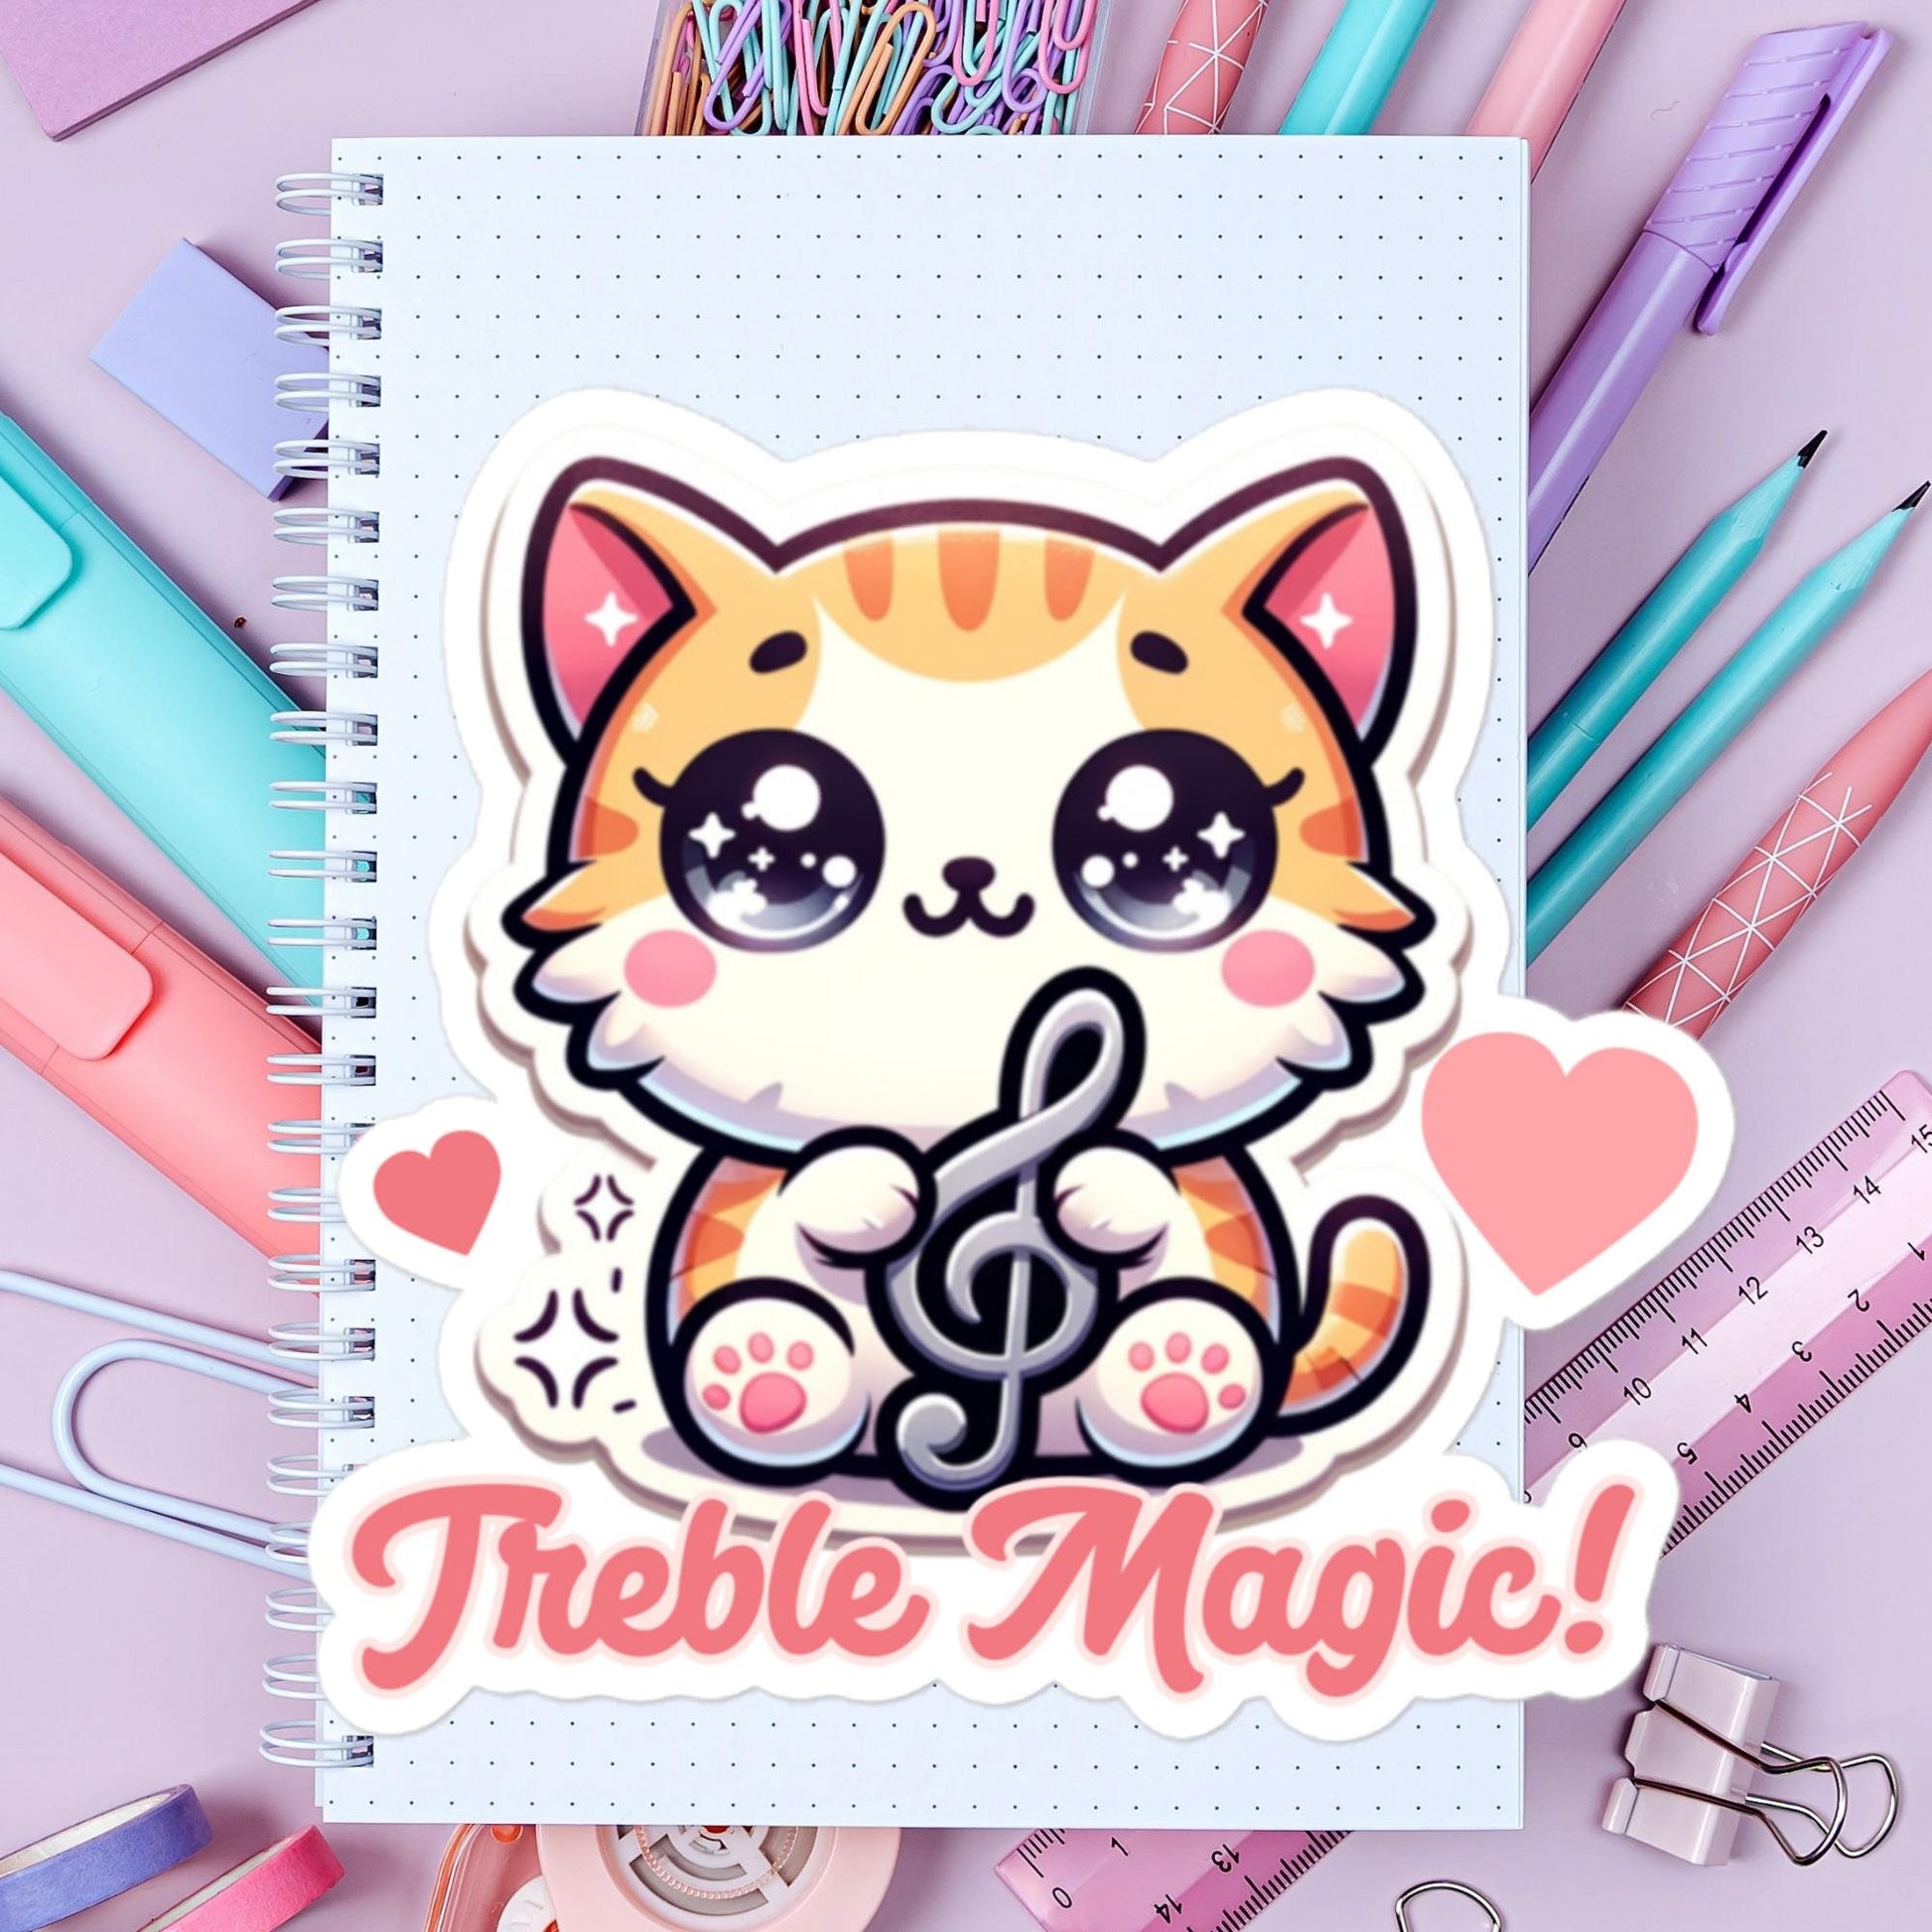 Treble Magic! Kitty holding trebel clef is ready to her debut! Cute stickersBubble-free stickers